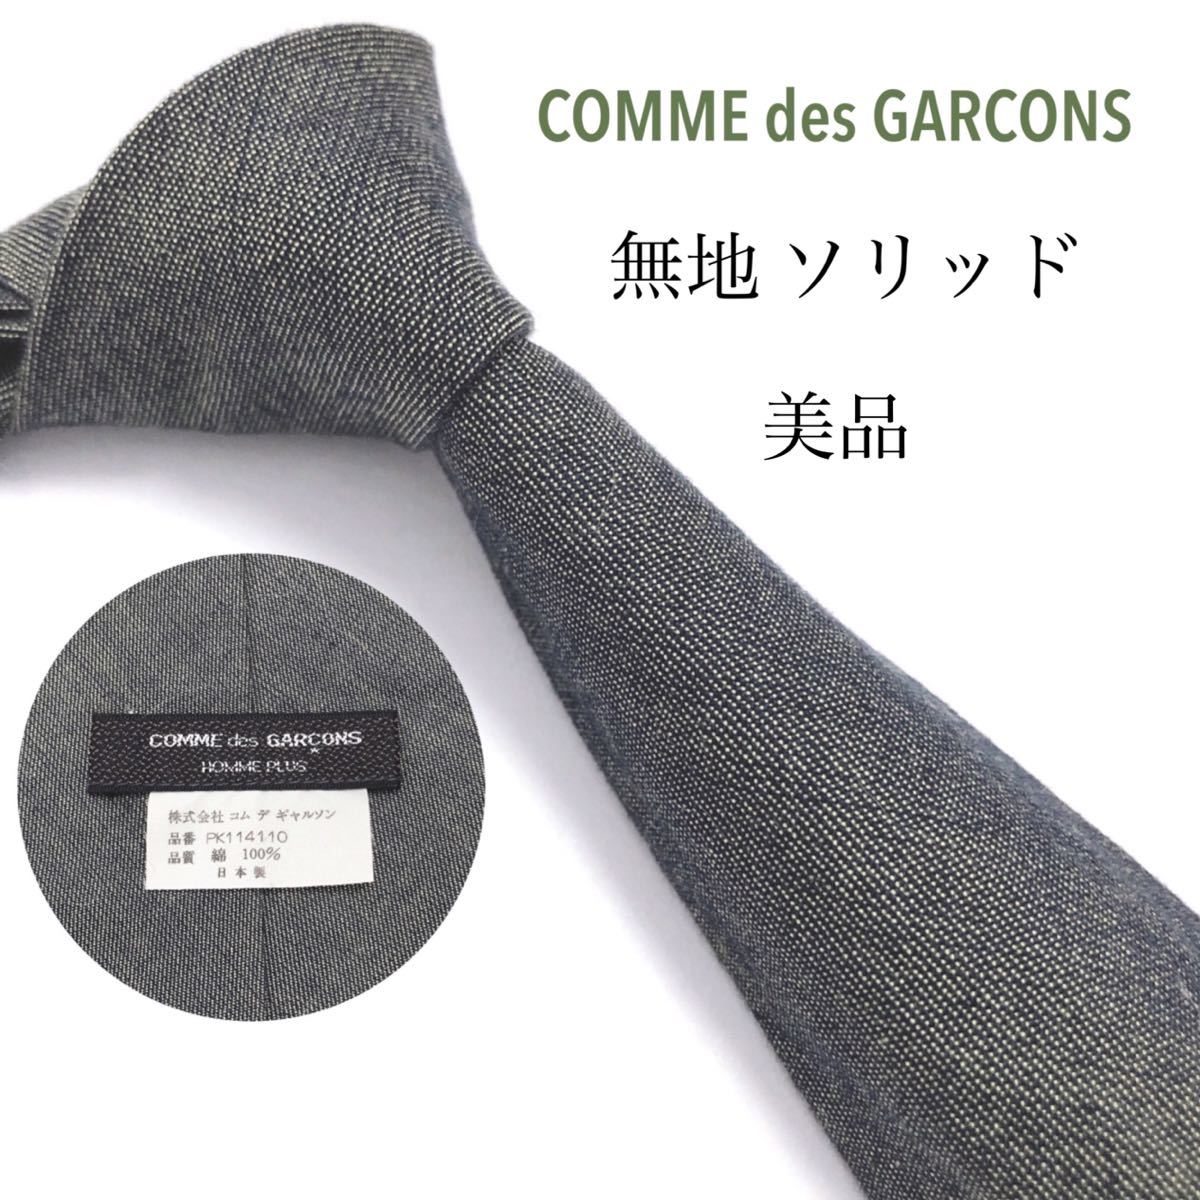 COMME des GARCONS 美品 ネクタイ 最高級シルク 無地 ソリッド